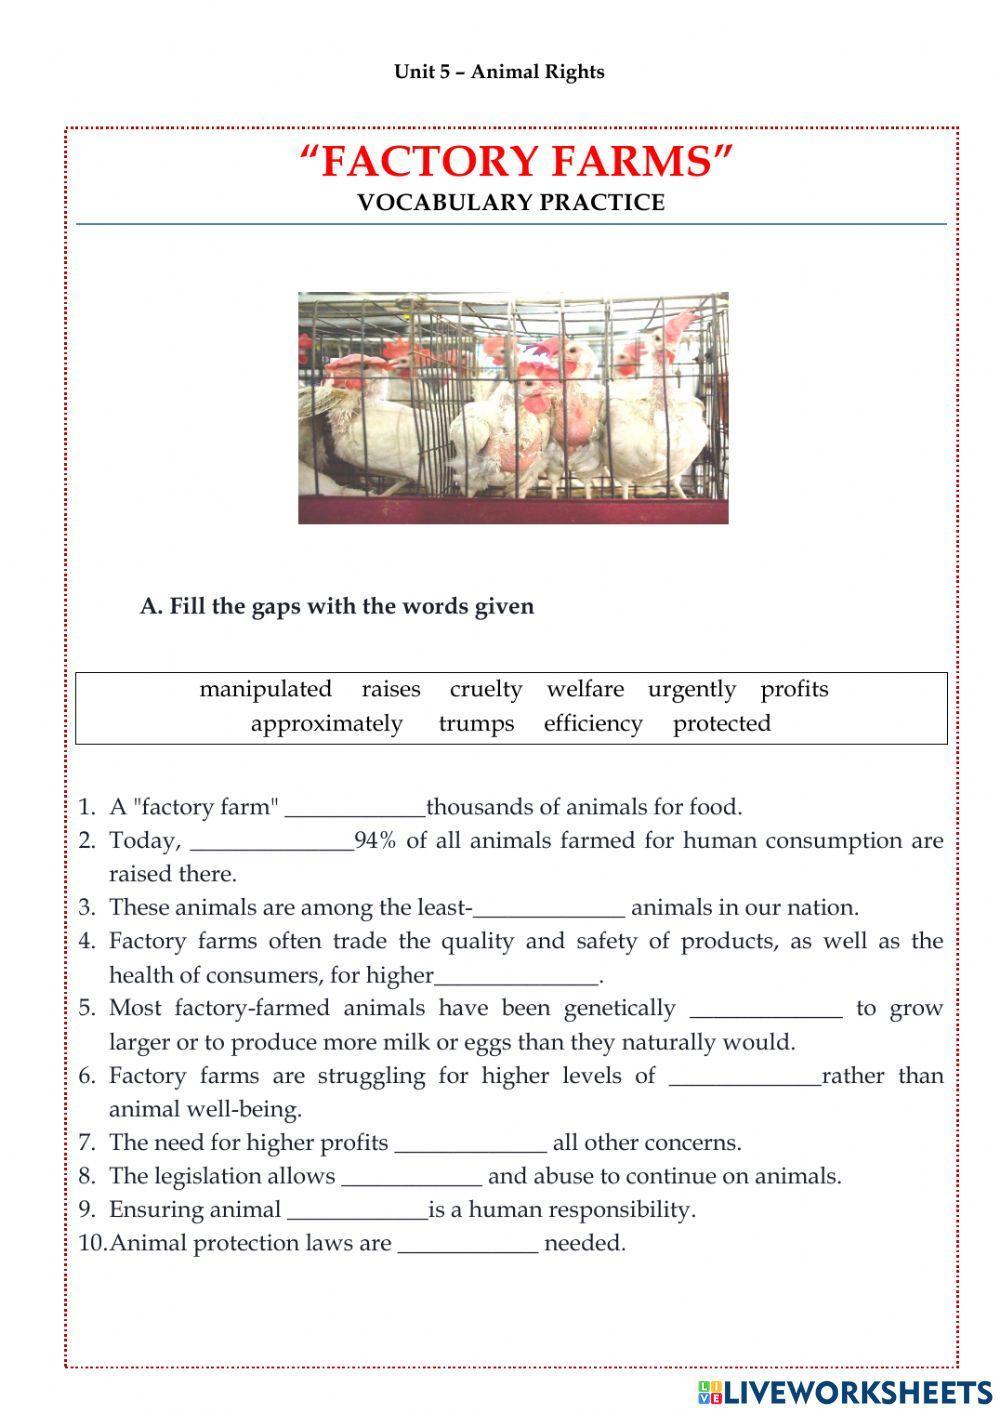 Unit 5 -Animal Rights- FACTORY FARMS